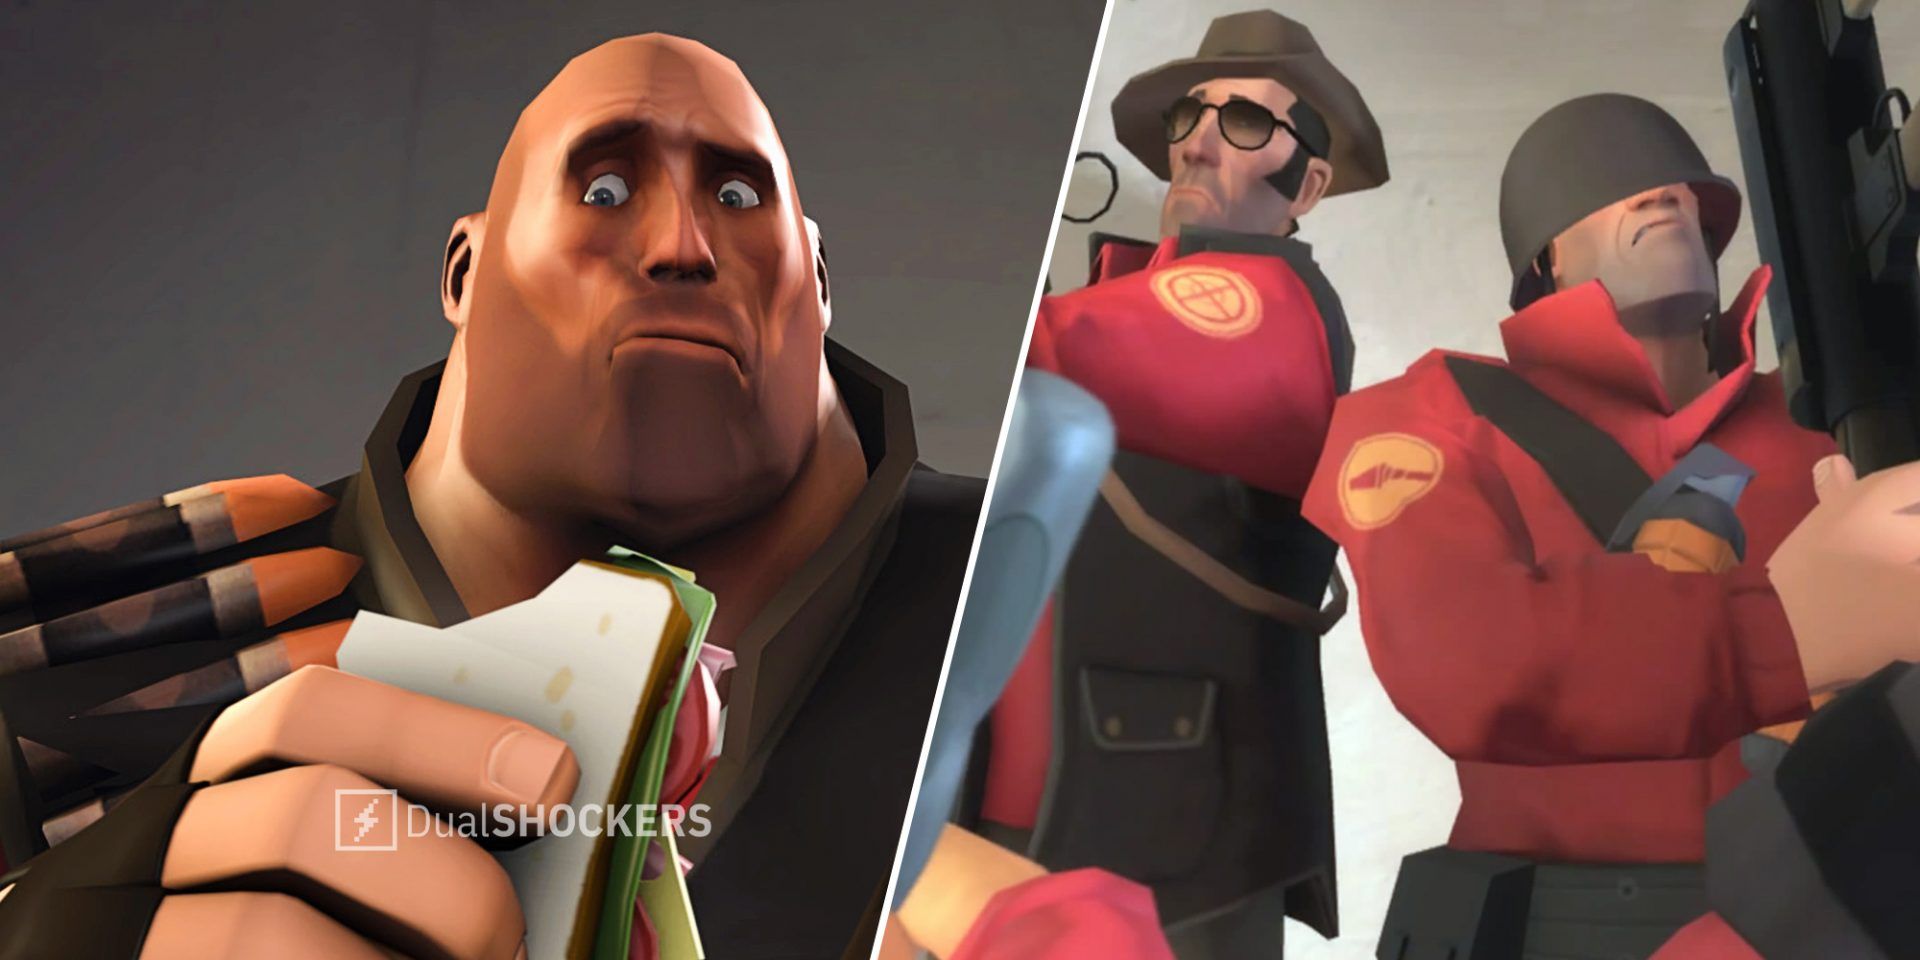 Team Fortress 2 The Heavy with sandwich on left, The Sniper and The Heavy on right